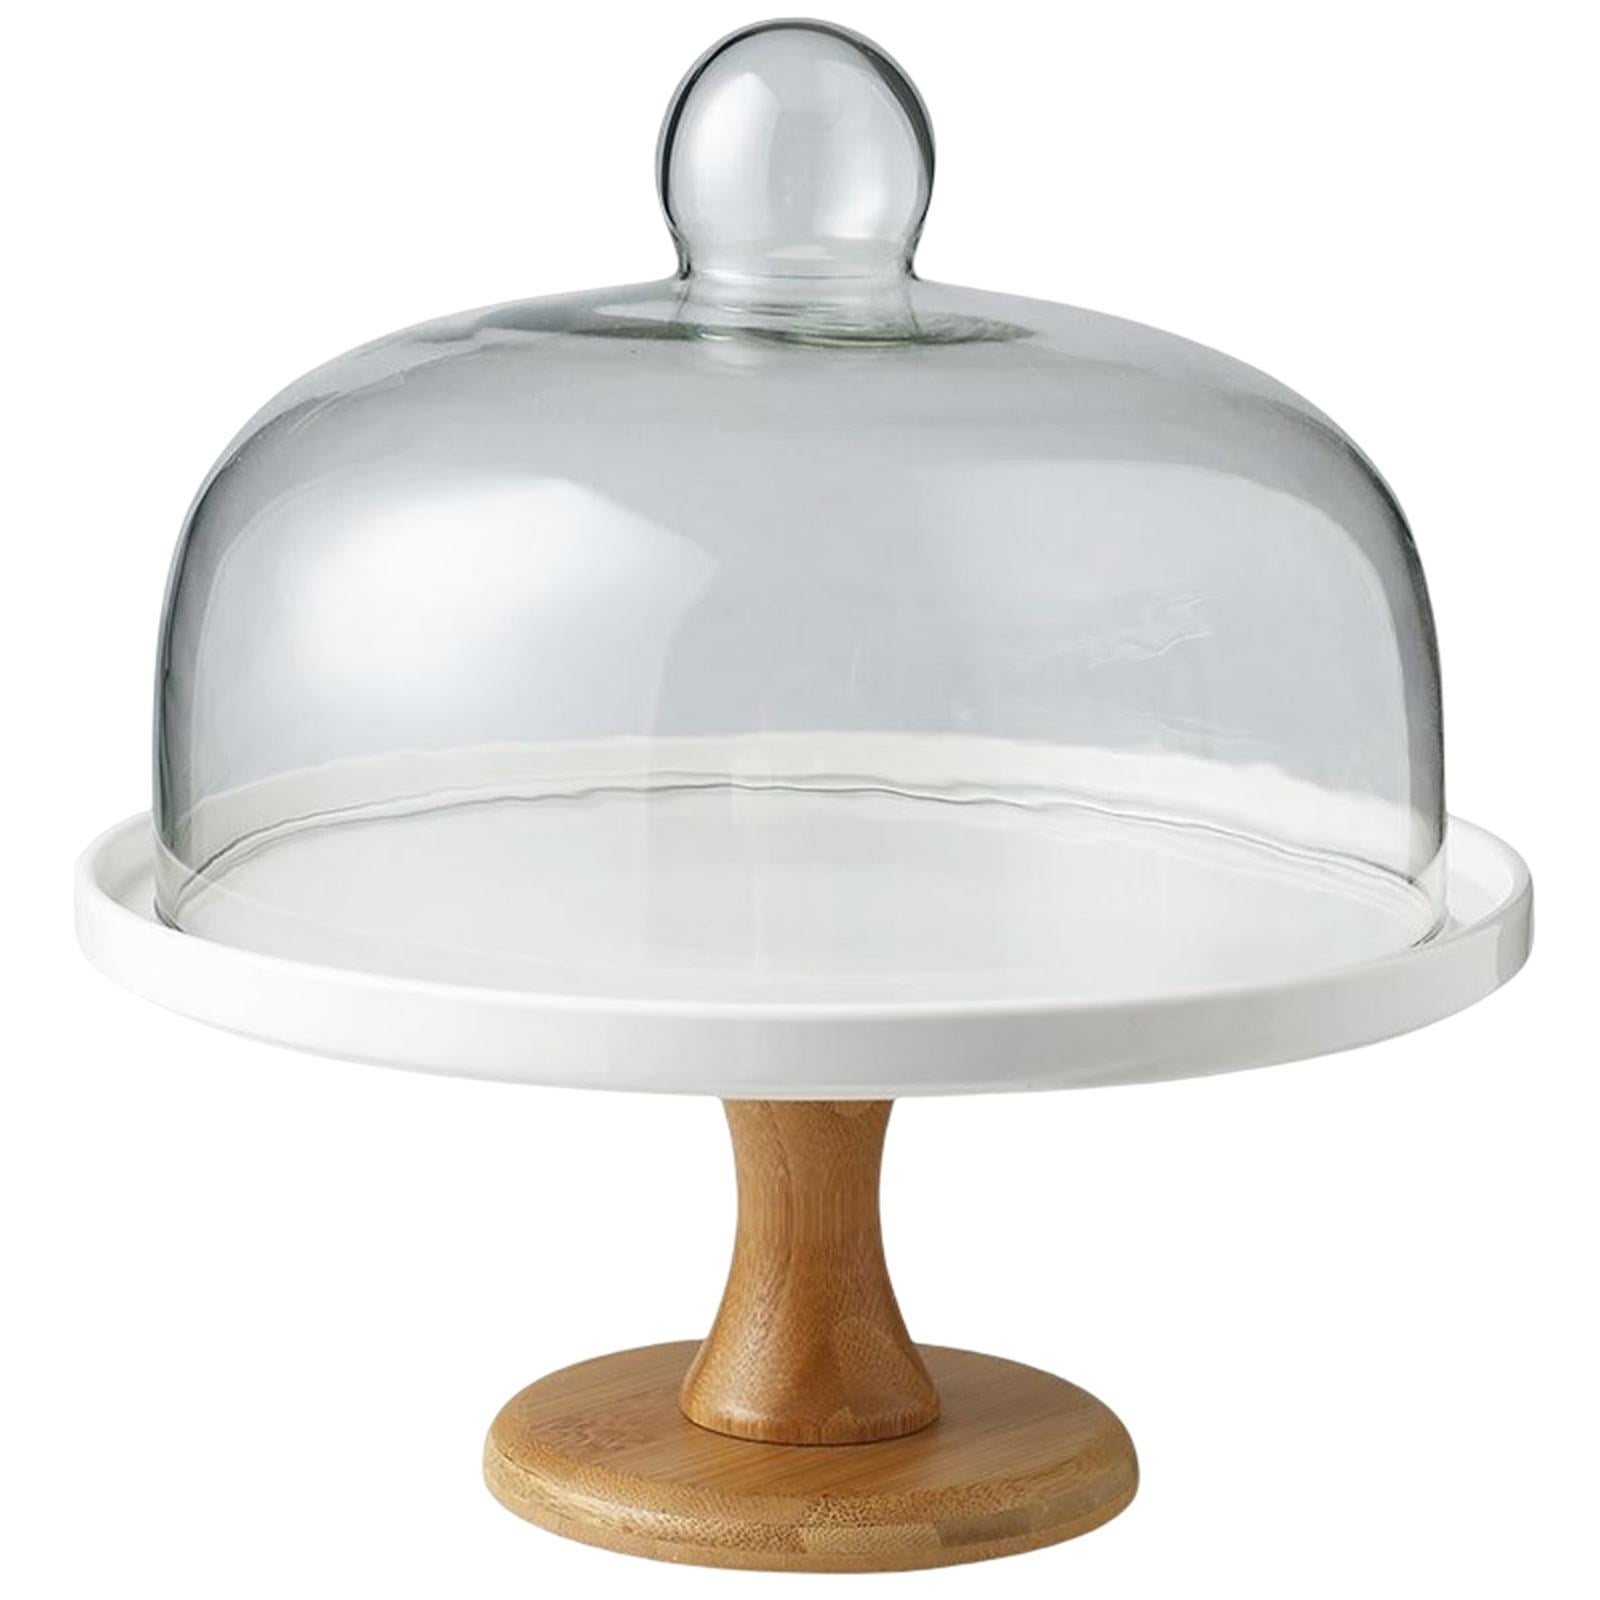 Medium Display Glass Cheese Stand with Dome Cover Lid 21 cm 